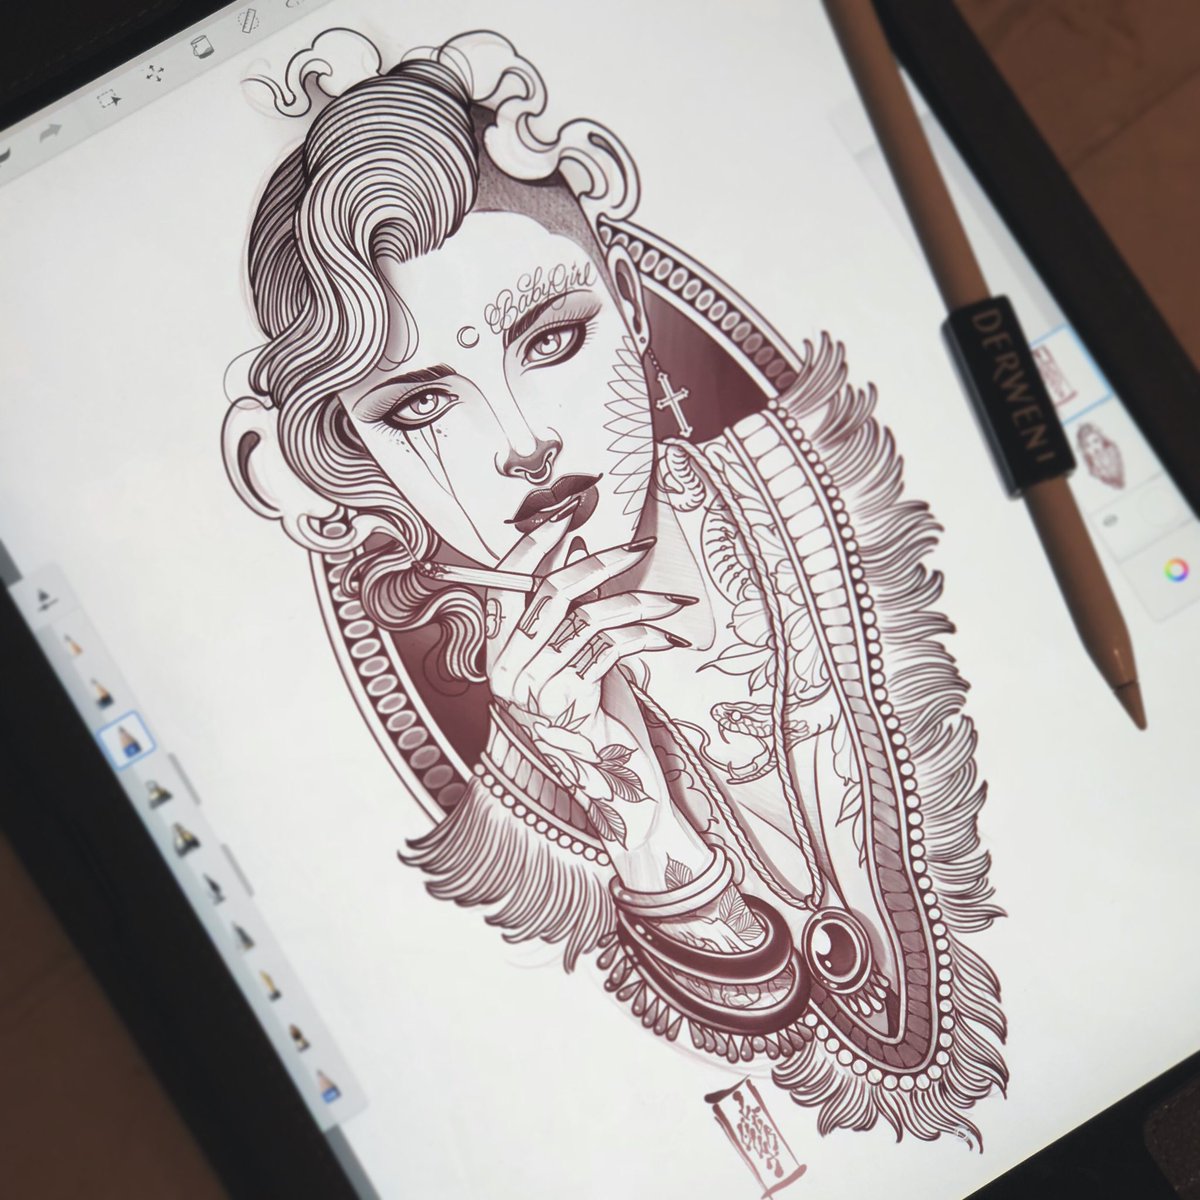 New drawing by Jean Le Roux •
You can message him directly through his Instagram if you want to get it #tattoolondon #jeanleroux #uktta #londontattooist #girlhead #sketch #tattoodesign